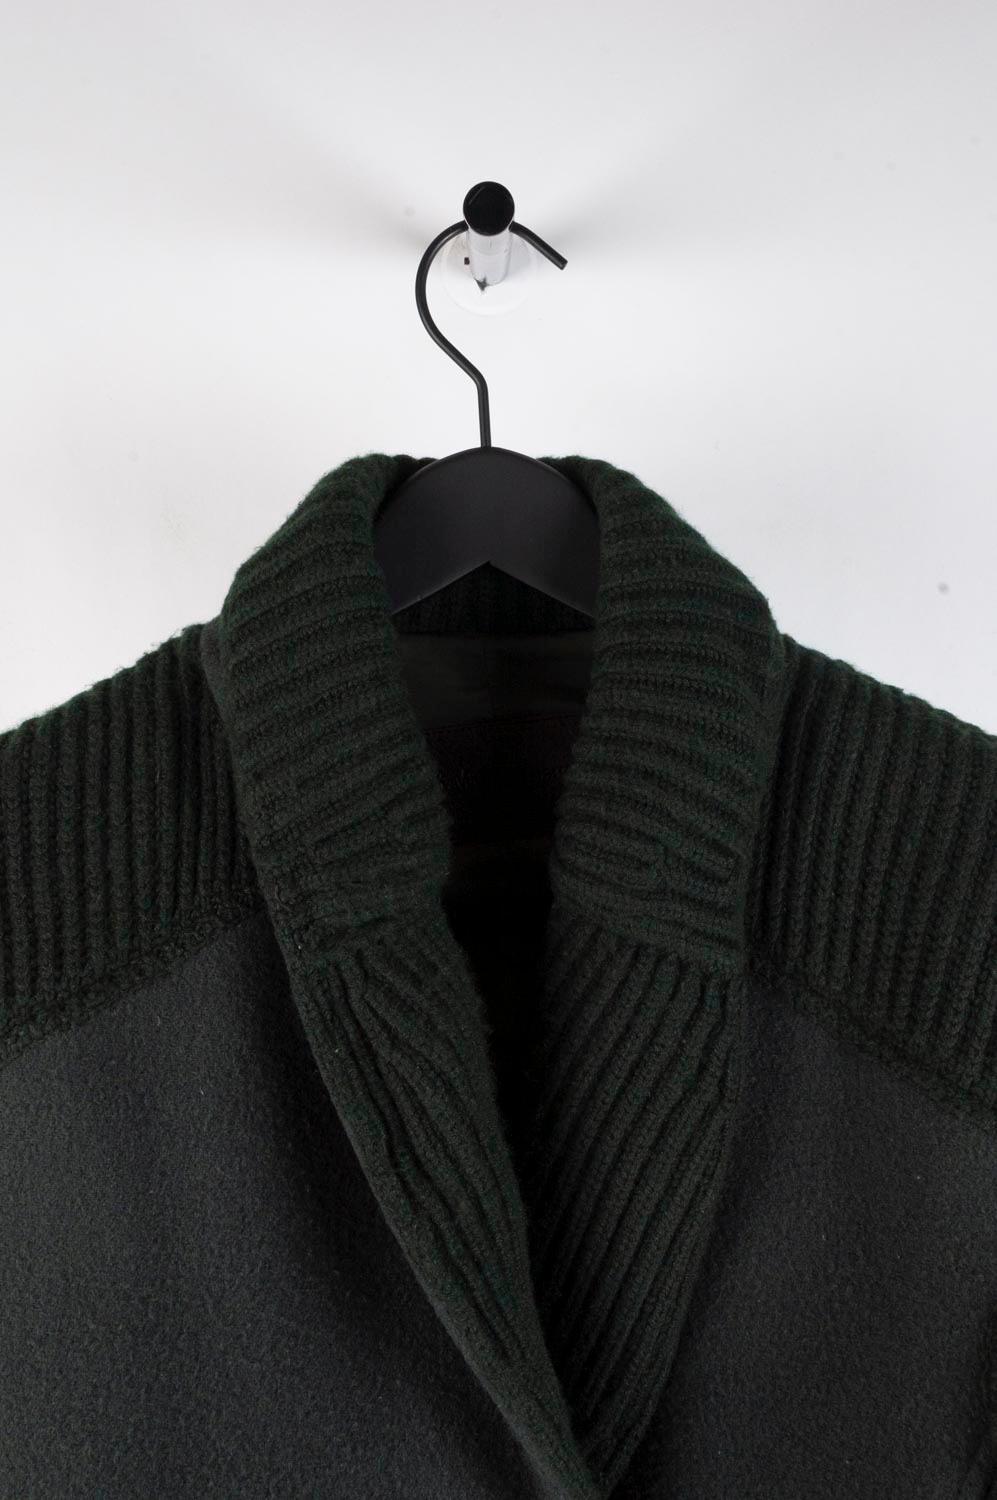 Item for sale is 100% genuine Salvatore Ferragamo Cardigan Style Men Jacket, S406
Color: Green
(An actual color may a bit vary due to individual computer screen interpretation)
Material: No care label but it is wool
Tag size: ITA48, runs Medium